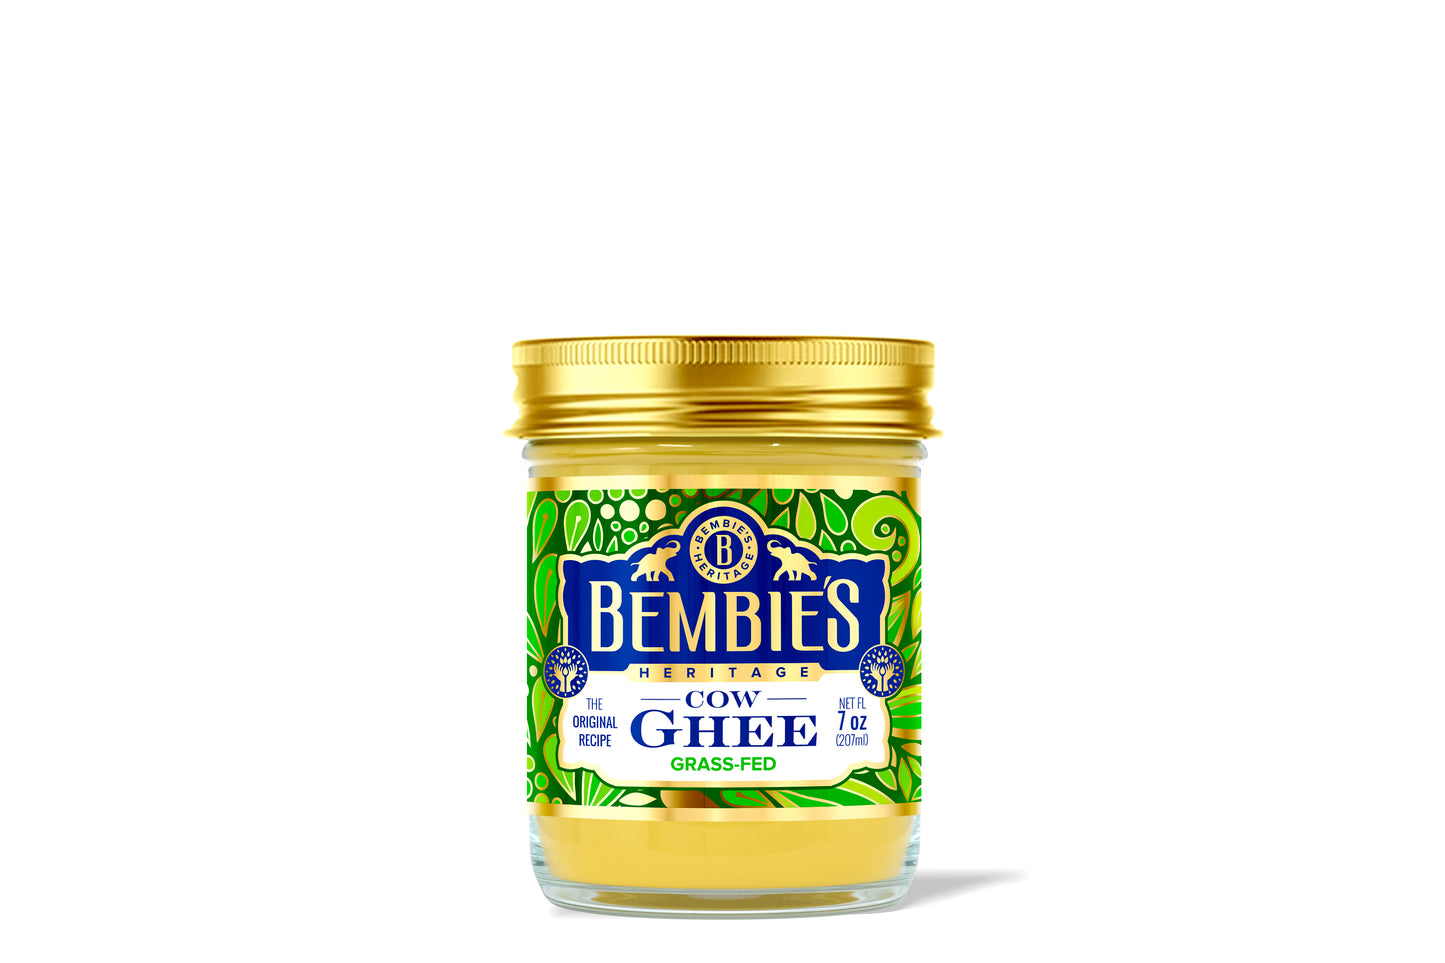 Glass jar filled with ghee 7 oz